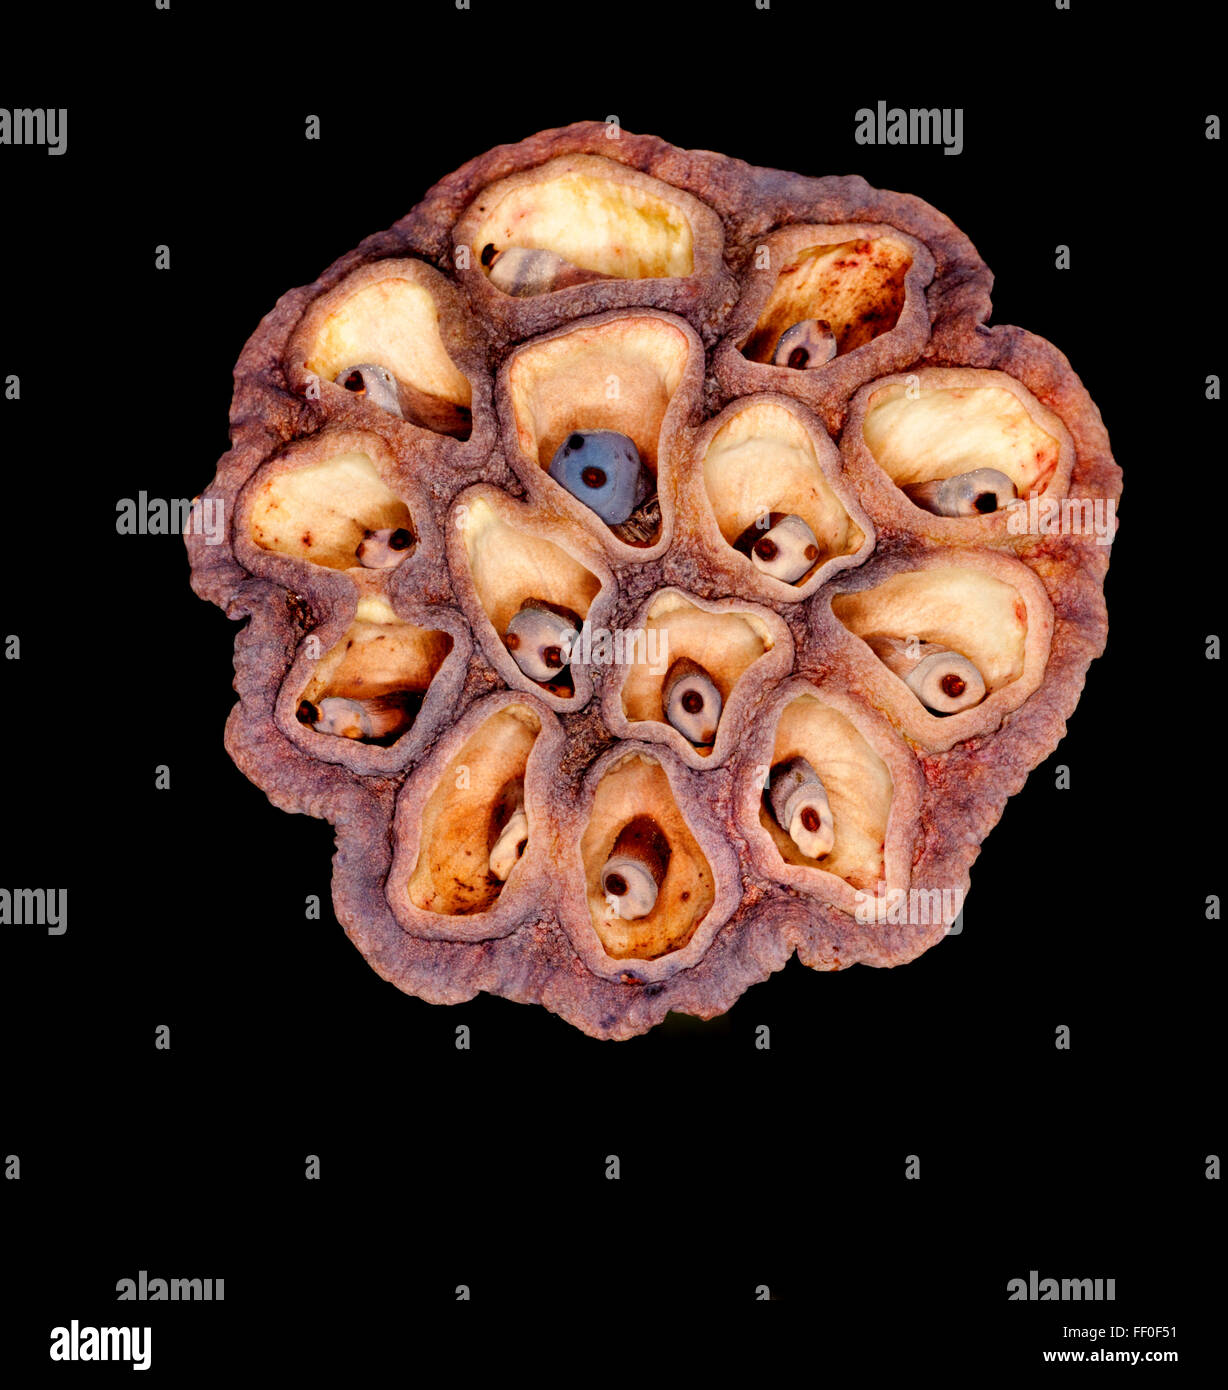 Lotus seeds or lotus nuts are the seeds of plants in the genus Nelumbo, particularly the species Nelumbo nucifera. The seeds are Stock Photo